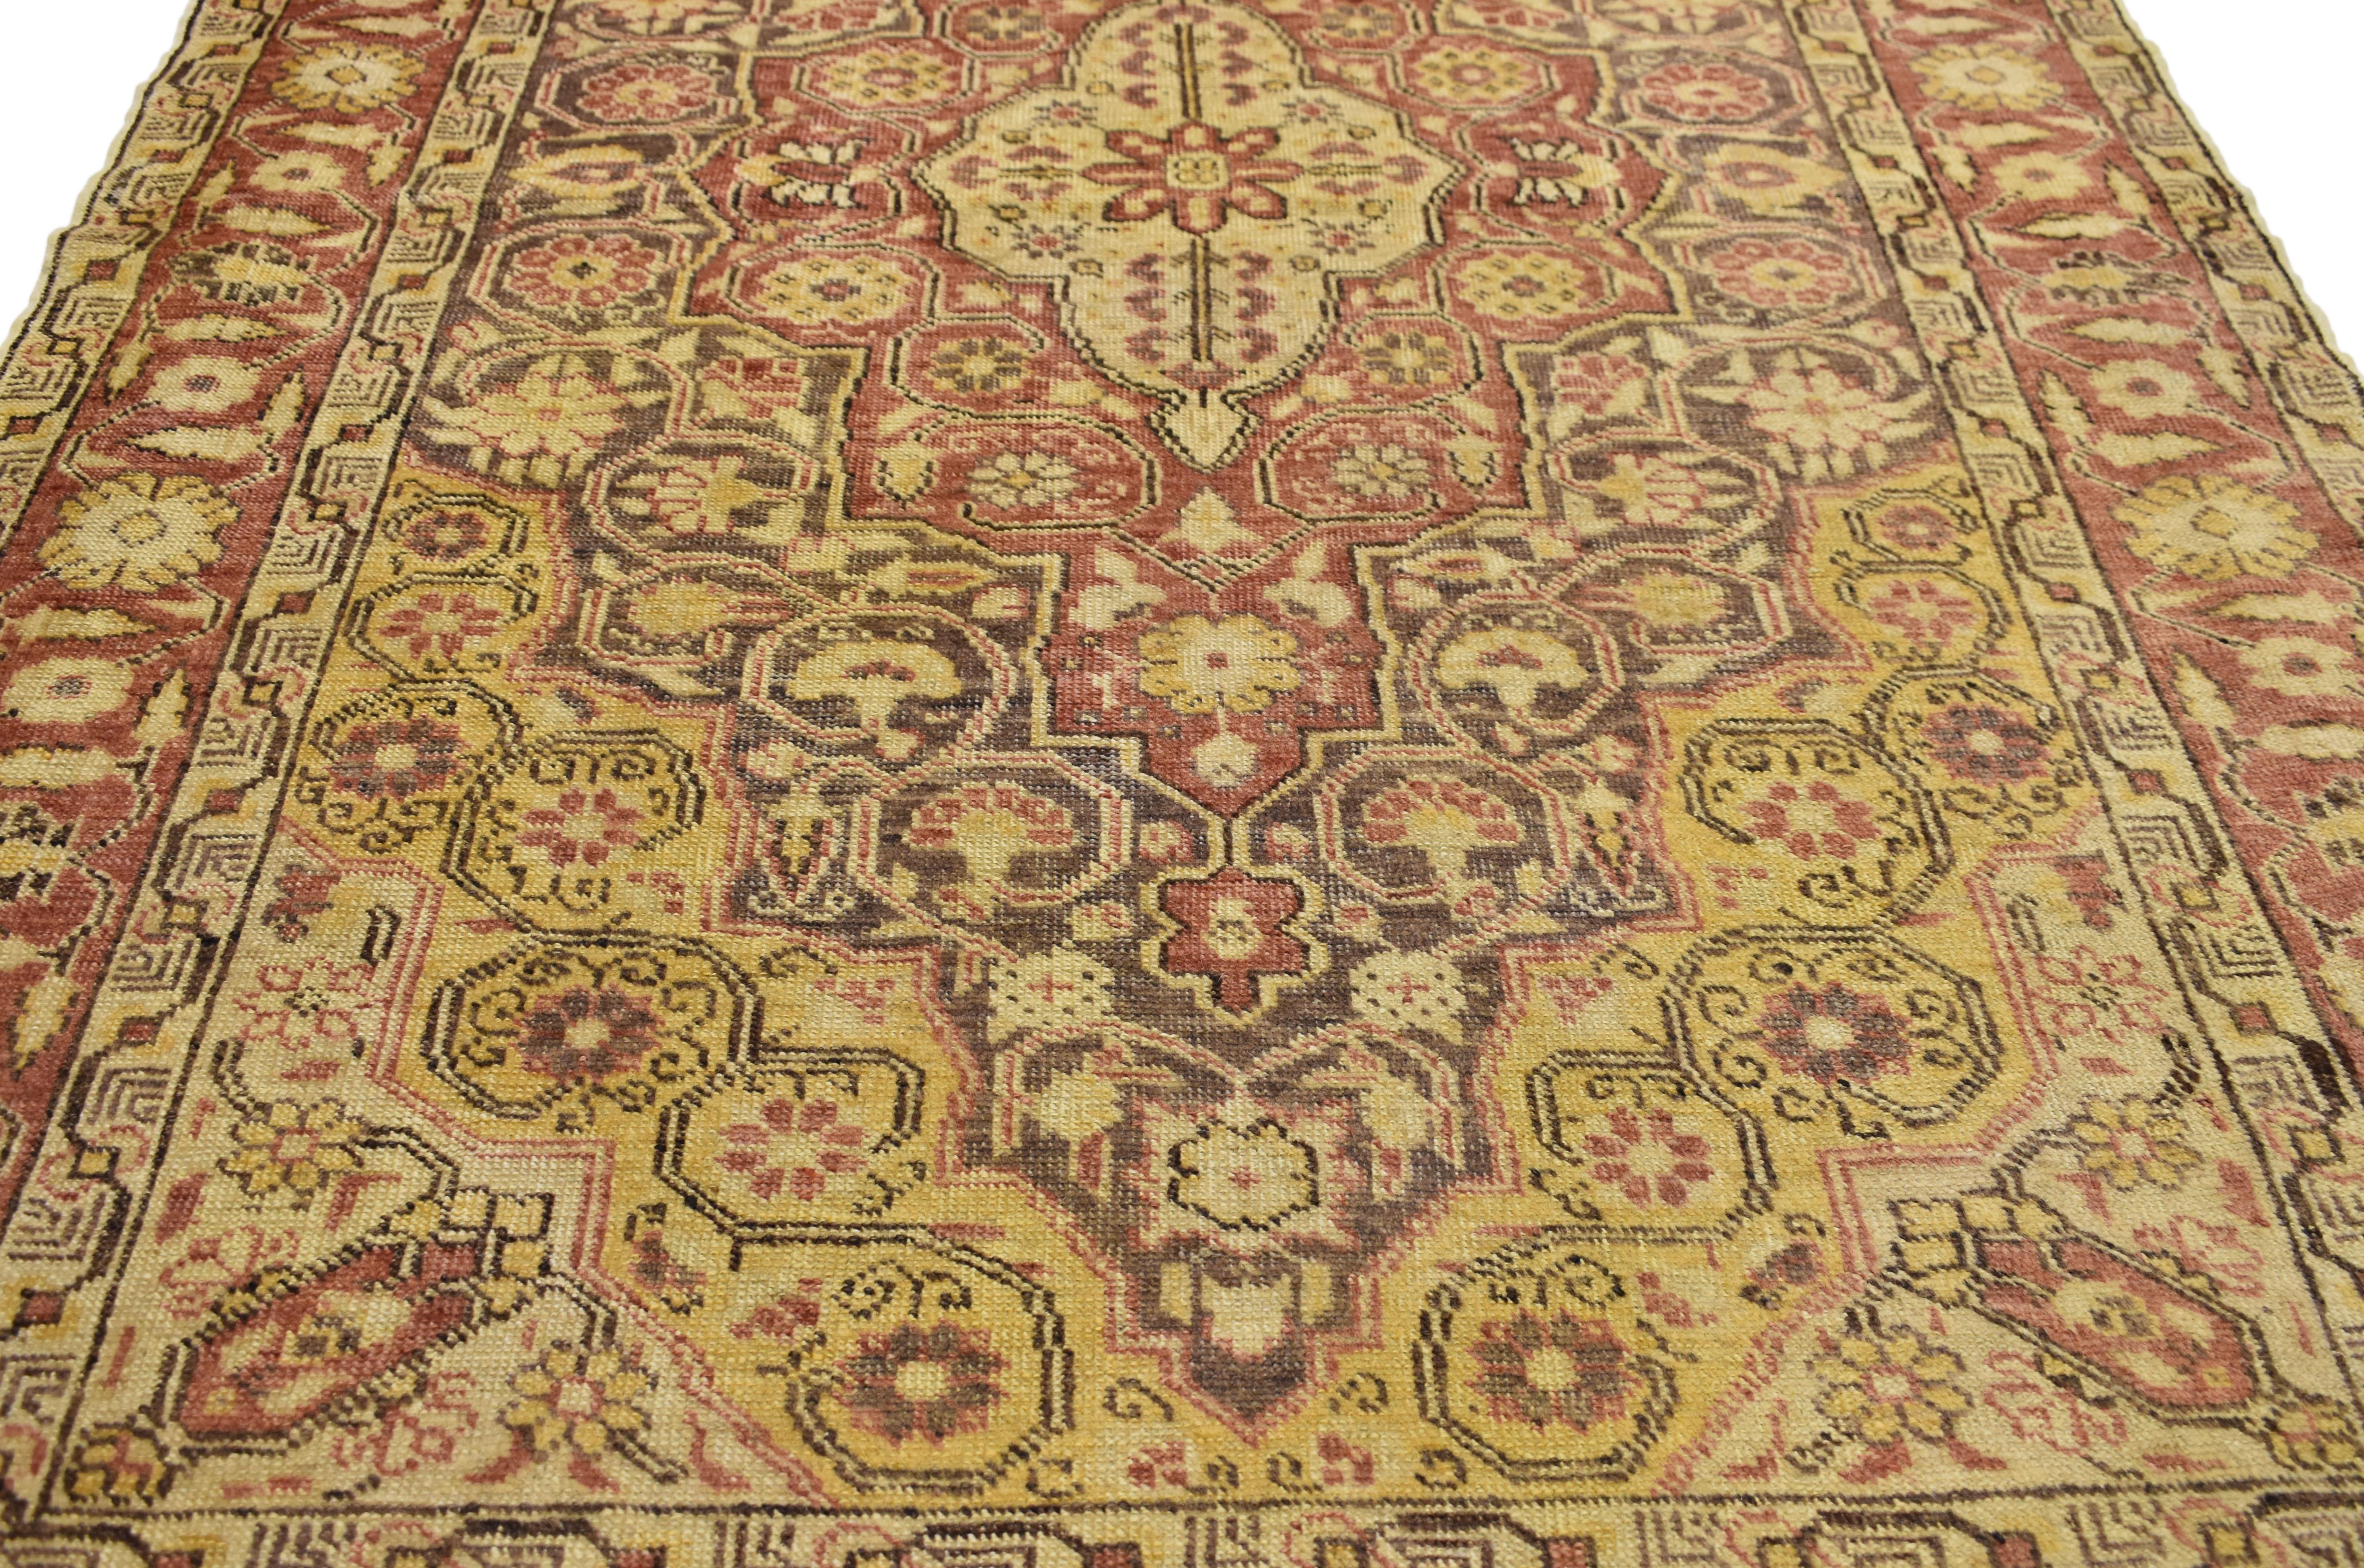 73927, modern rustic style vintage Turkish Oushak accent rug, entry or foyer rug. This hand-knotted wool vintage Turkish Oushak accent rug features a modern rustic style. Immersed in Anatolian history and time-softened colors, this vintage rustic